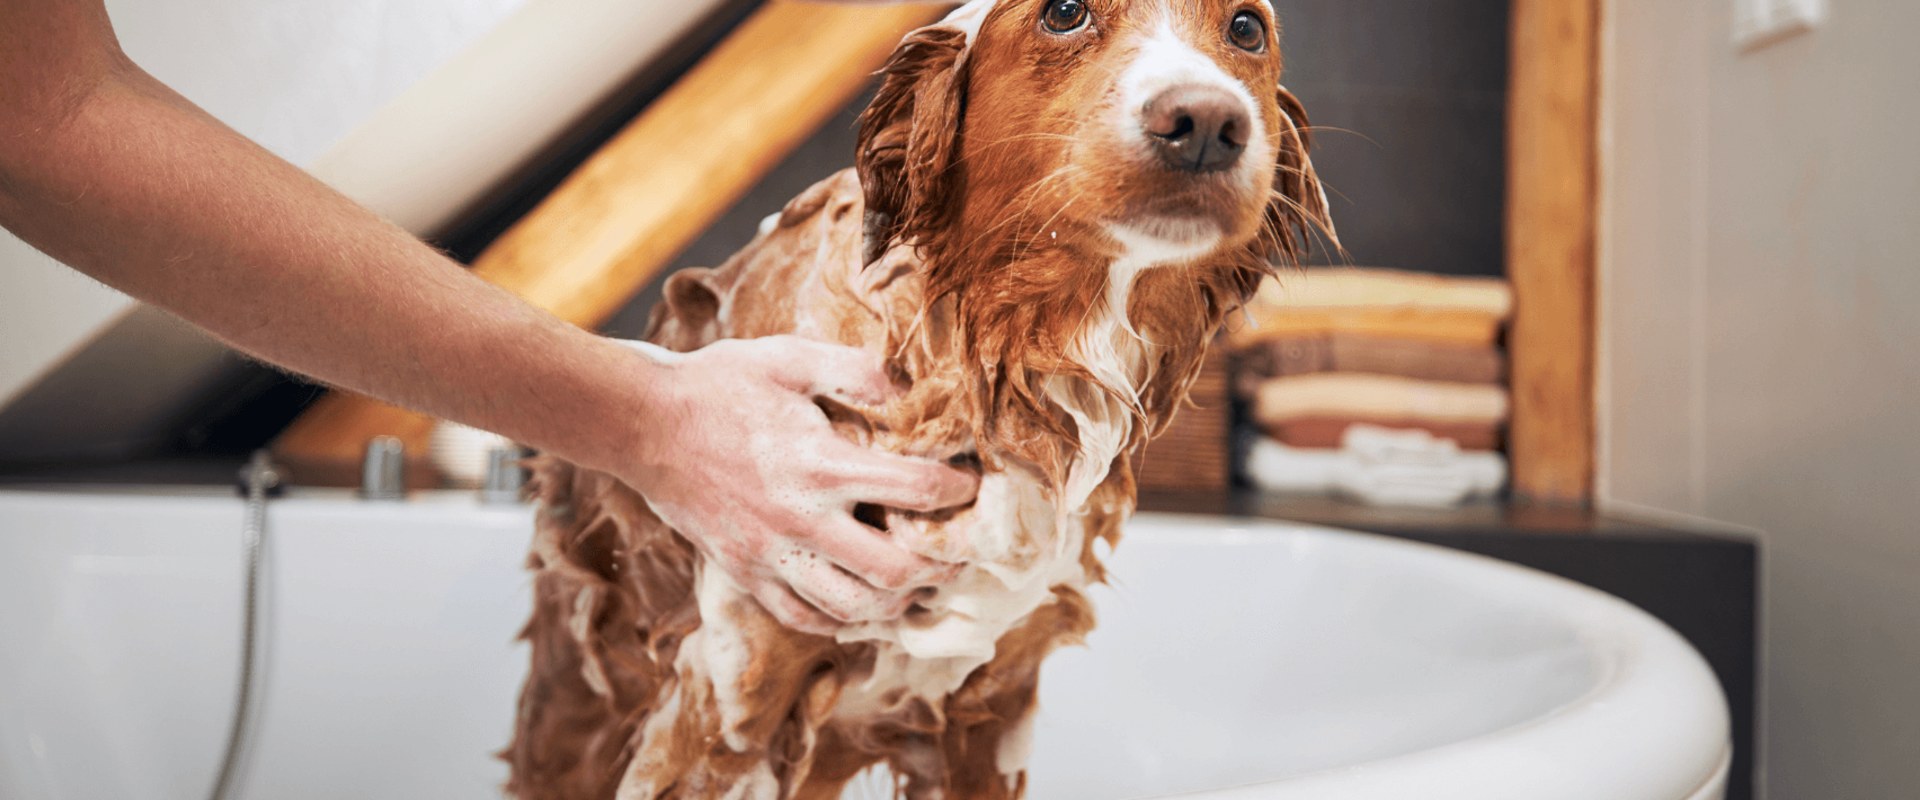 The Importance of Regular Bathing and Brushing for Your Dog